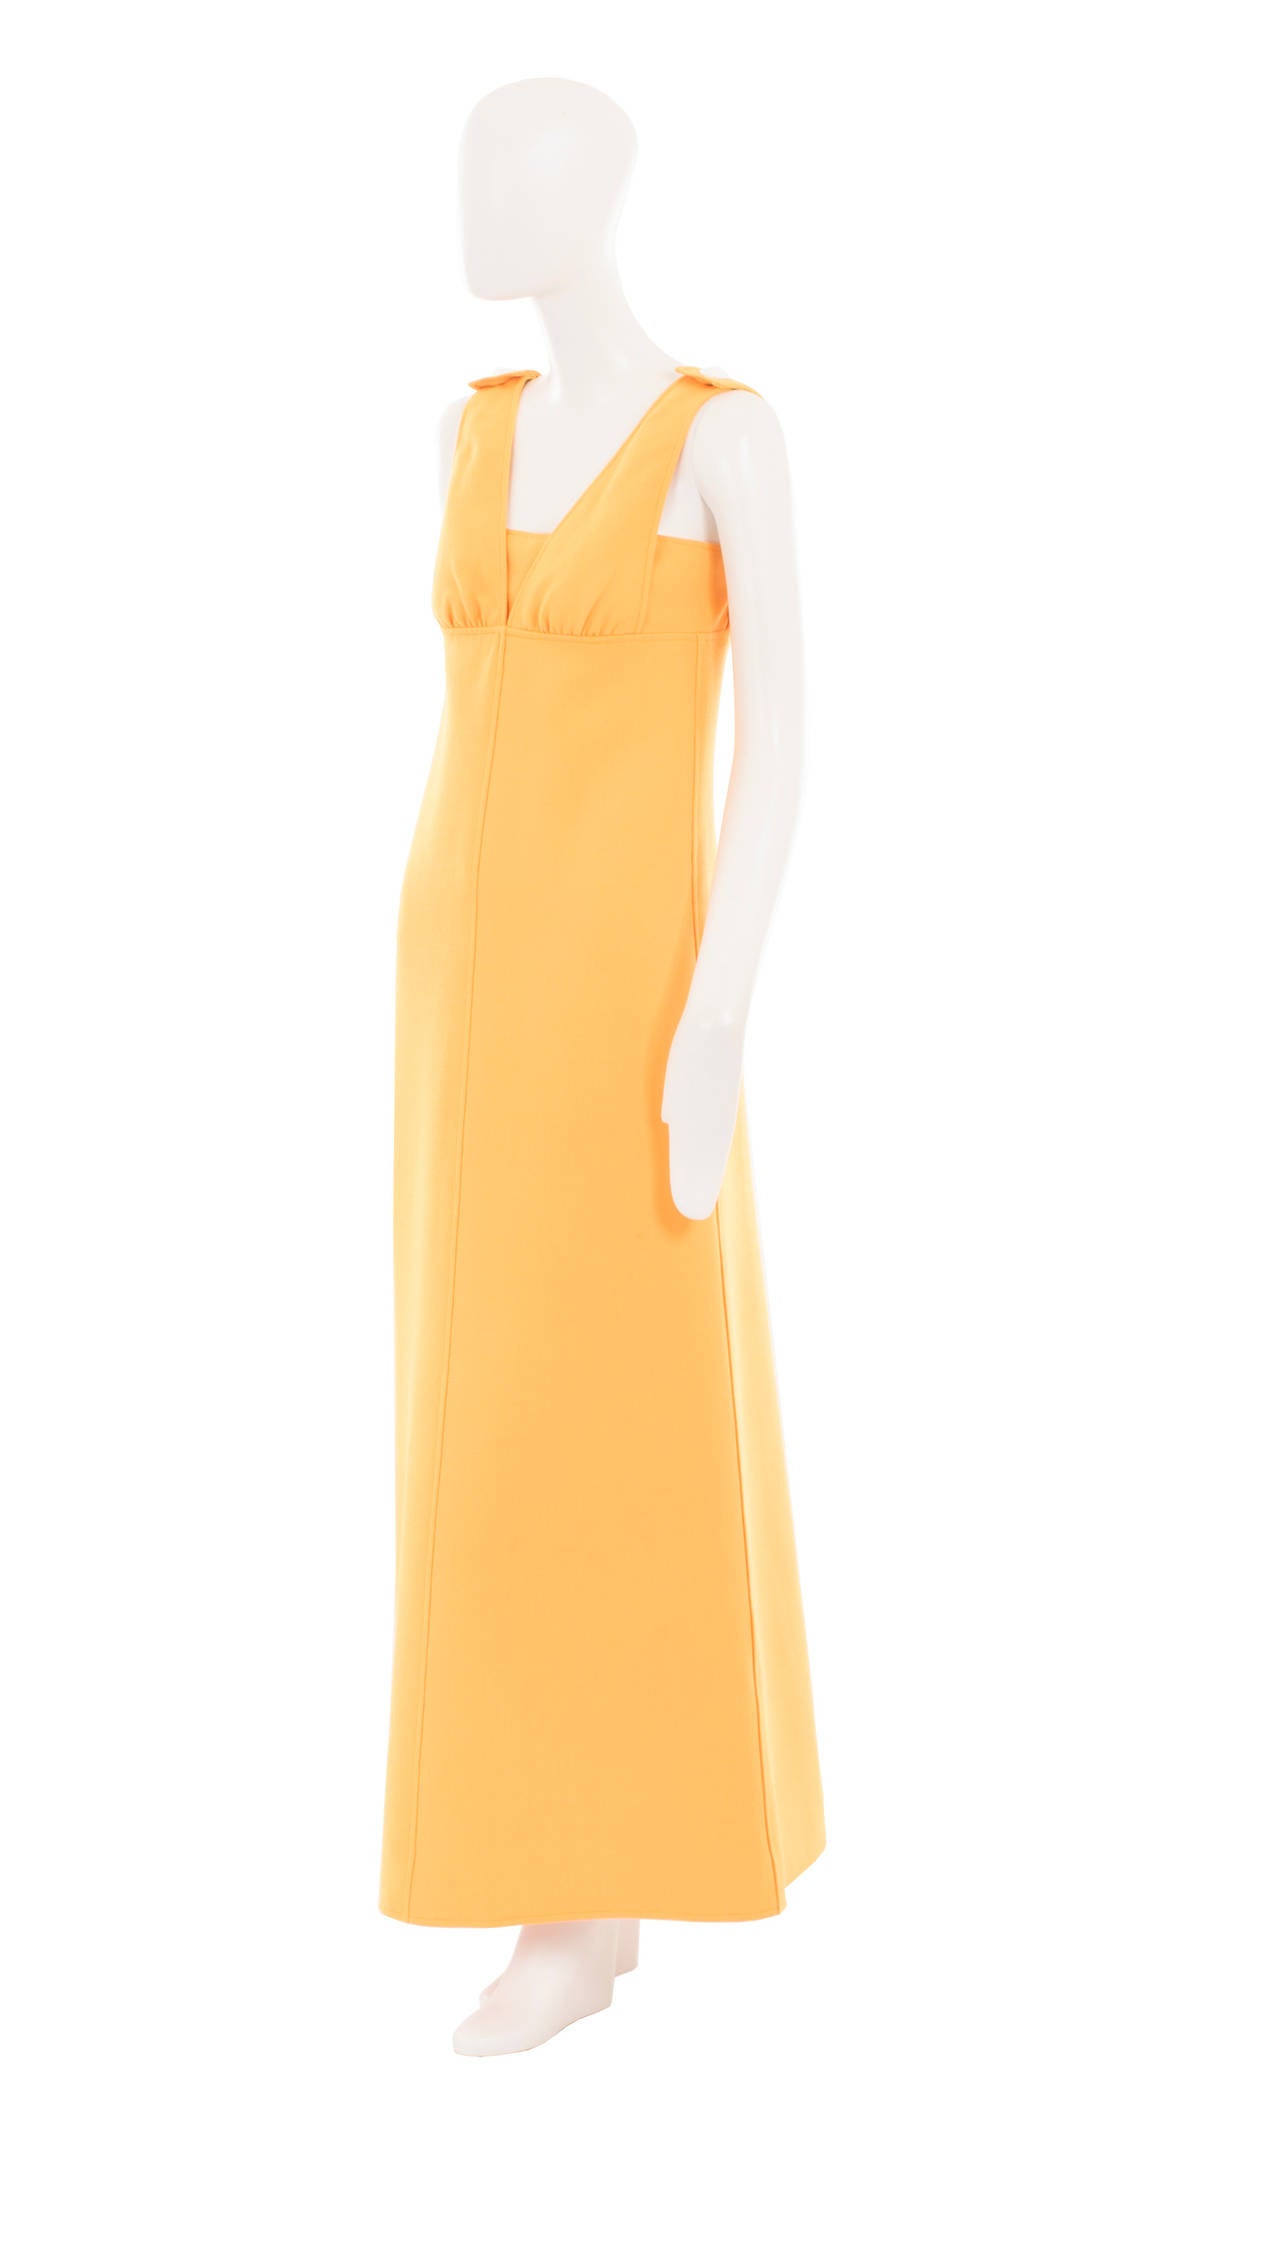 An amazing example of the modernist aesthetic that Courrèges was famous for, this saffron yellow maxi dress has a structured A-line silhouette. The dress features a v-neckline, with a seam running under the bust to create an empire line effect, and